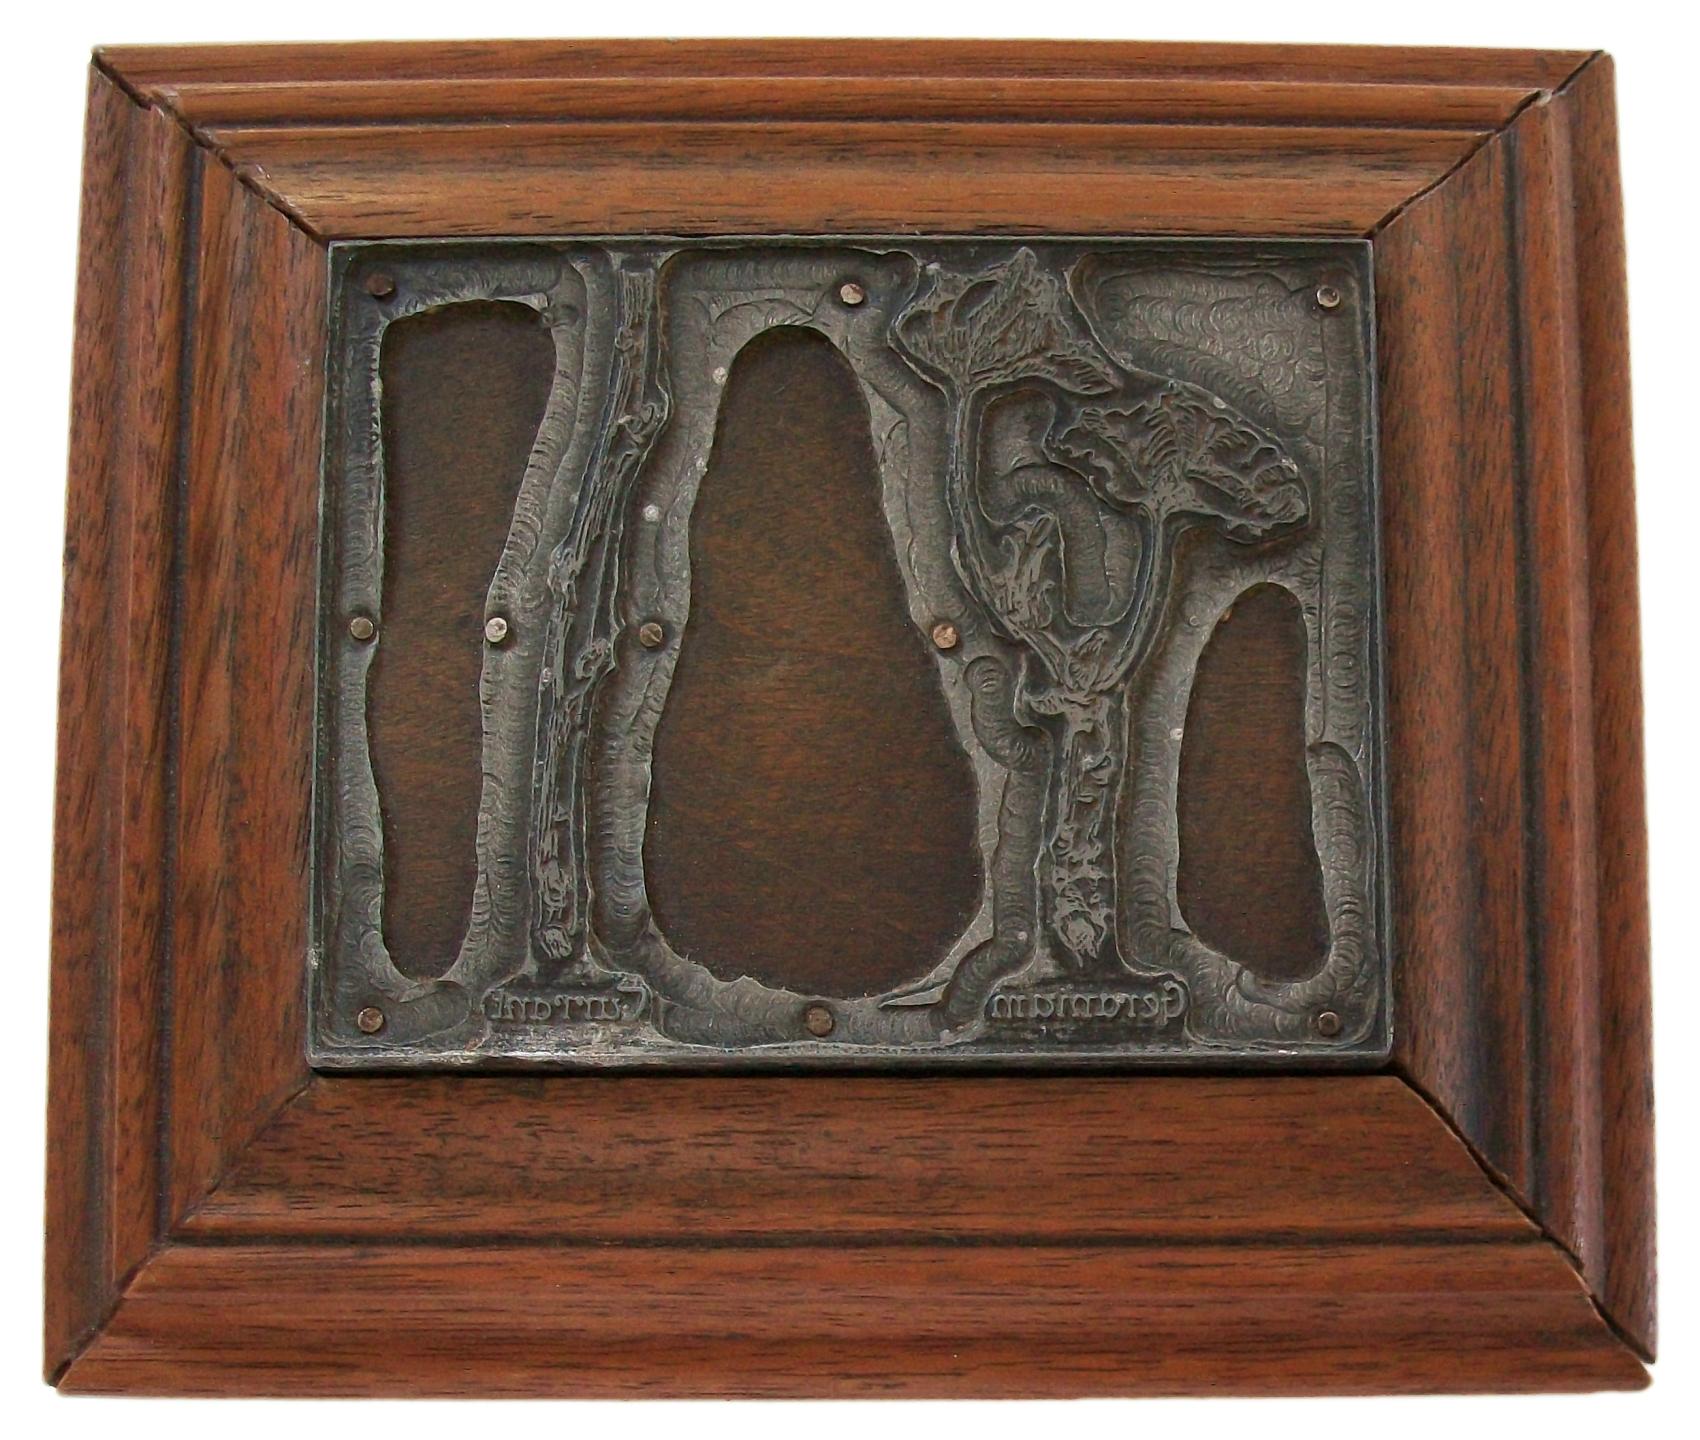 Hand-Crafted Antique Botanical Book Printing / Engraving Plate, Walnut Frame, 19th Century For Sale